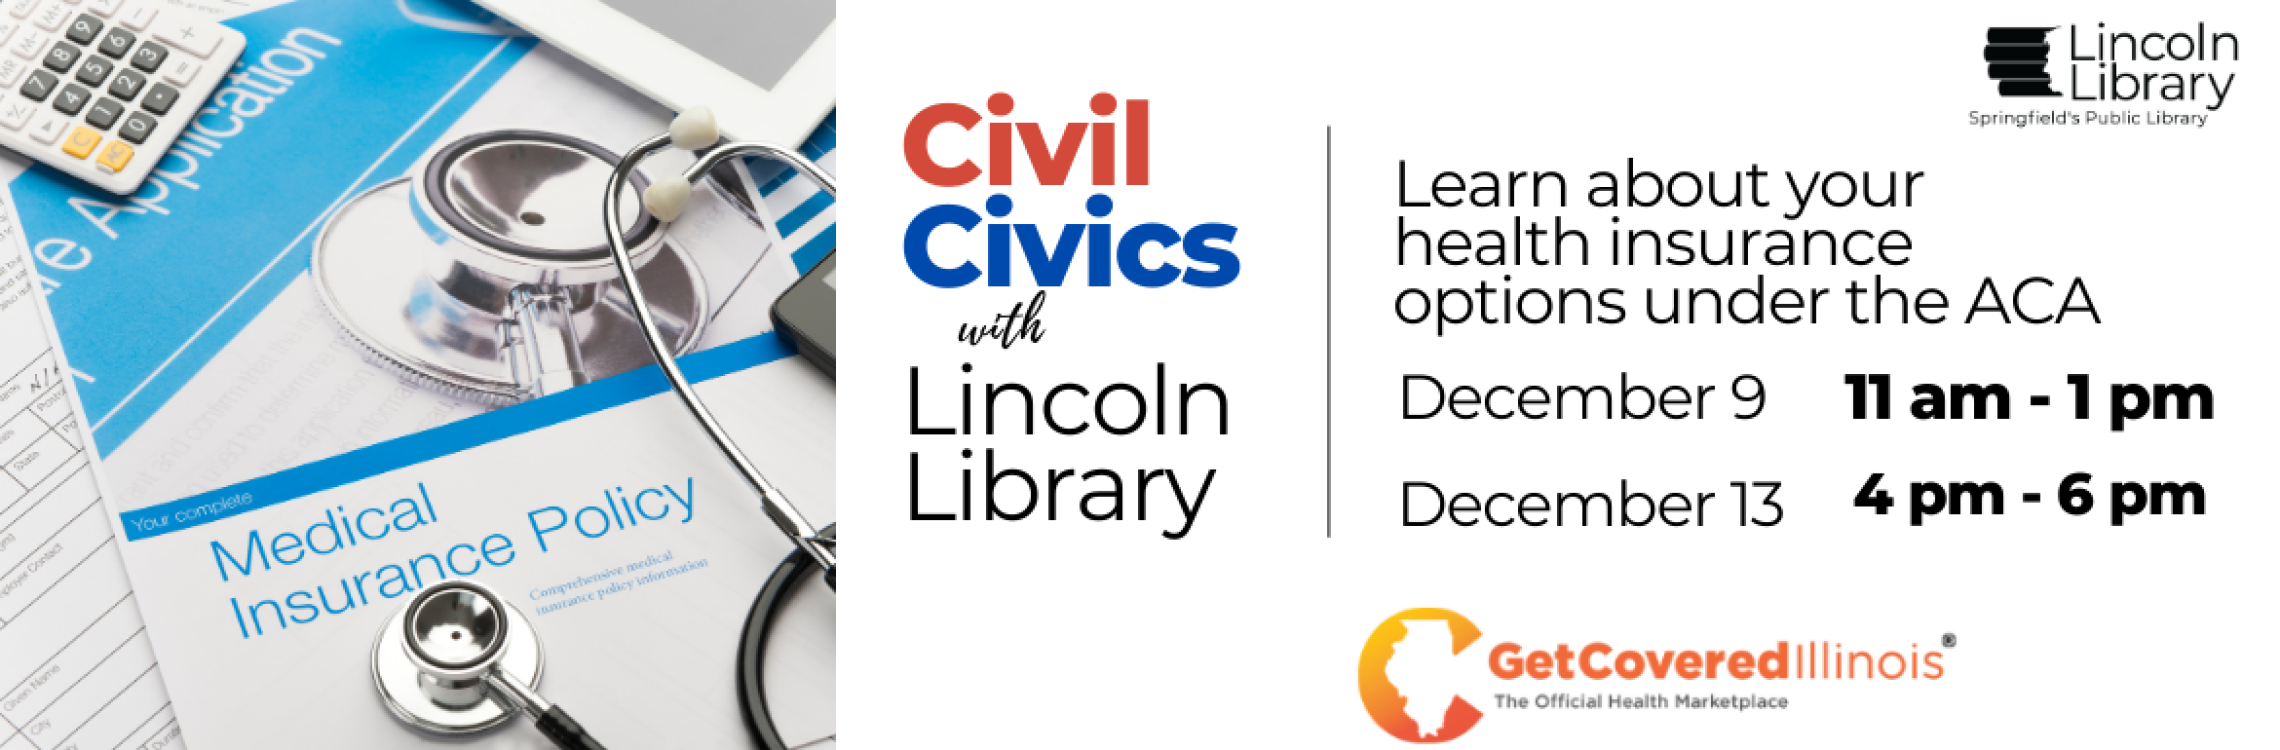 Learn about your health insurance options. December 9, 11am and December 13, 4pm